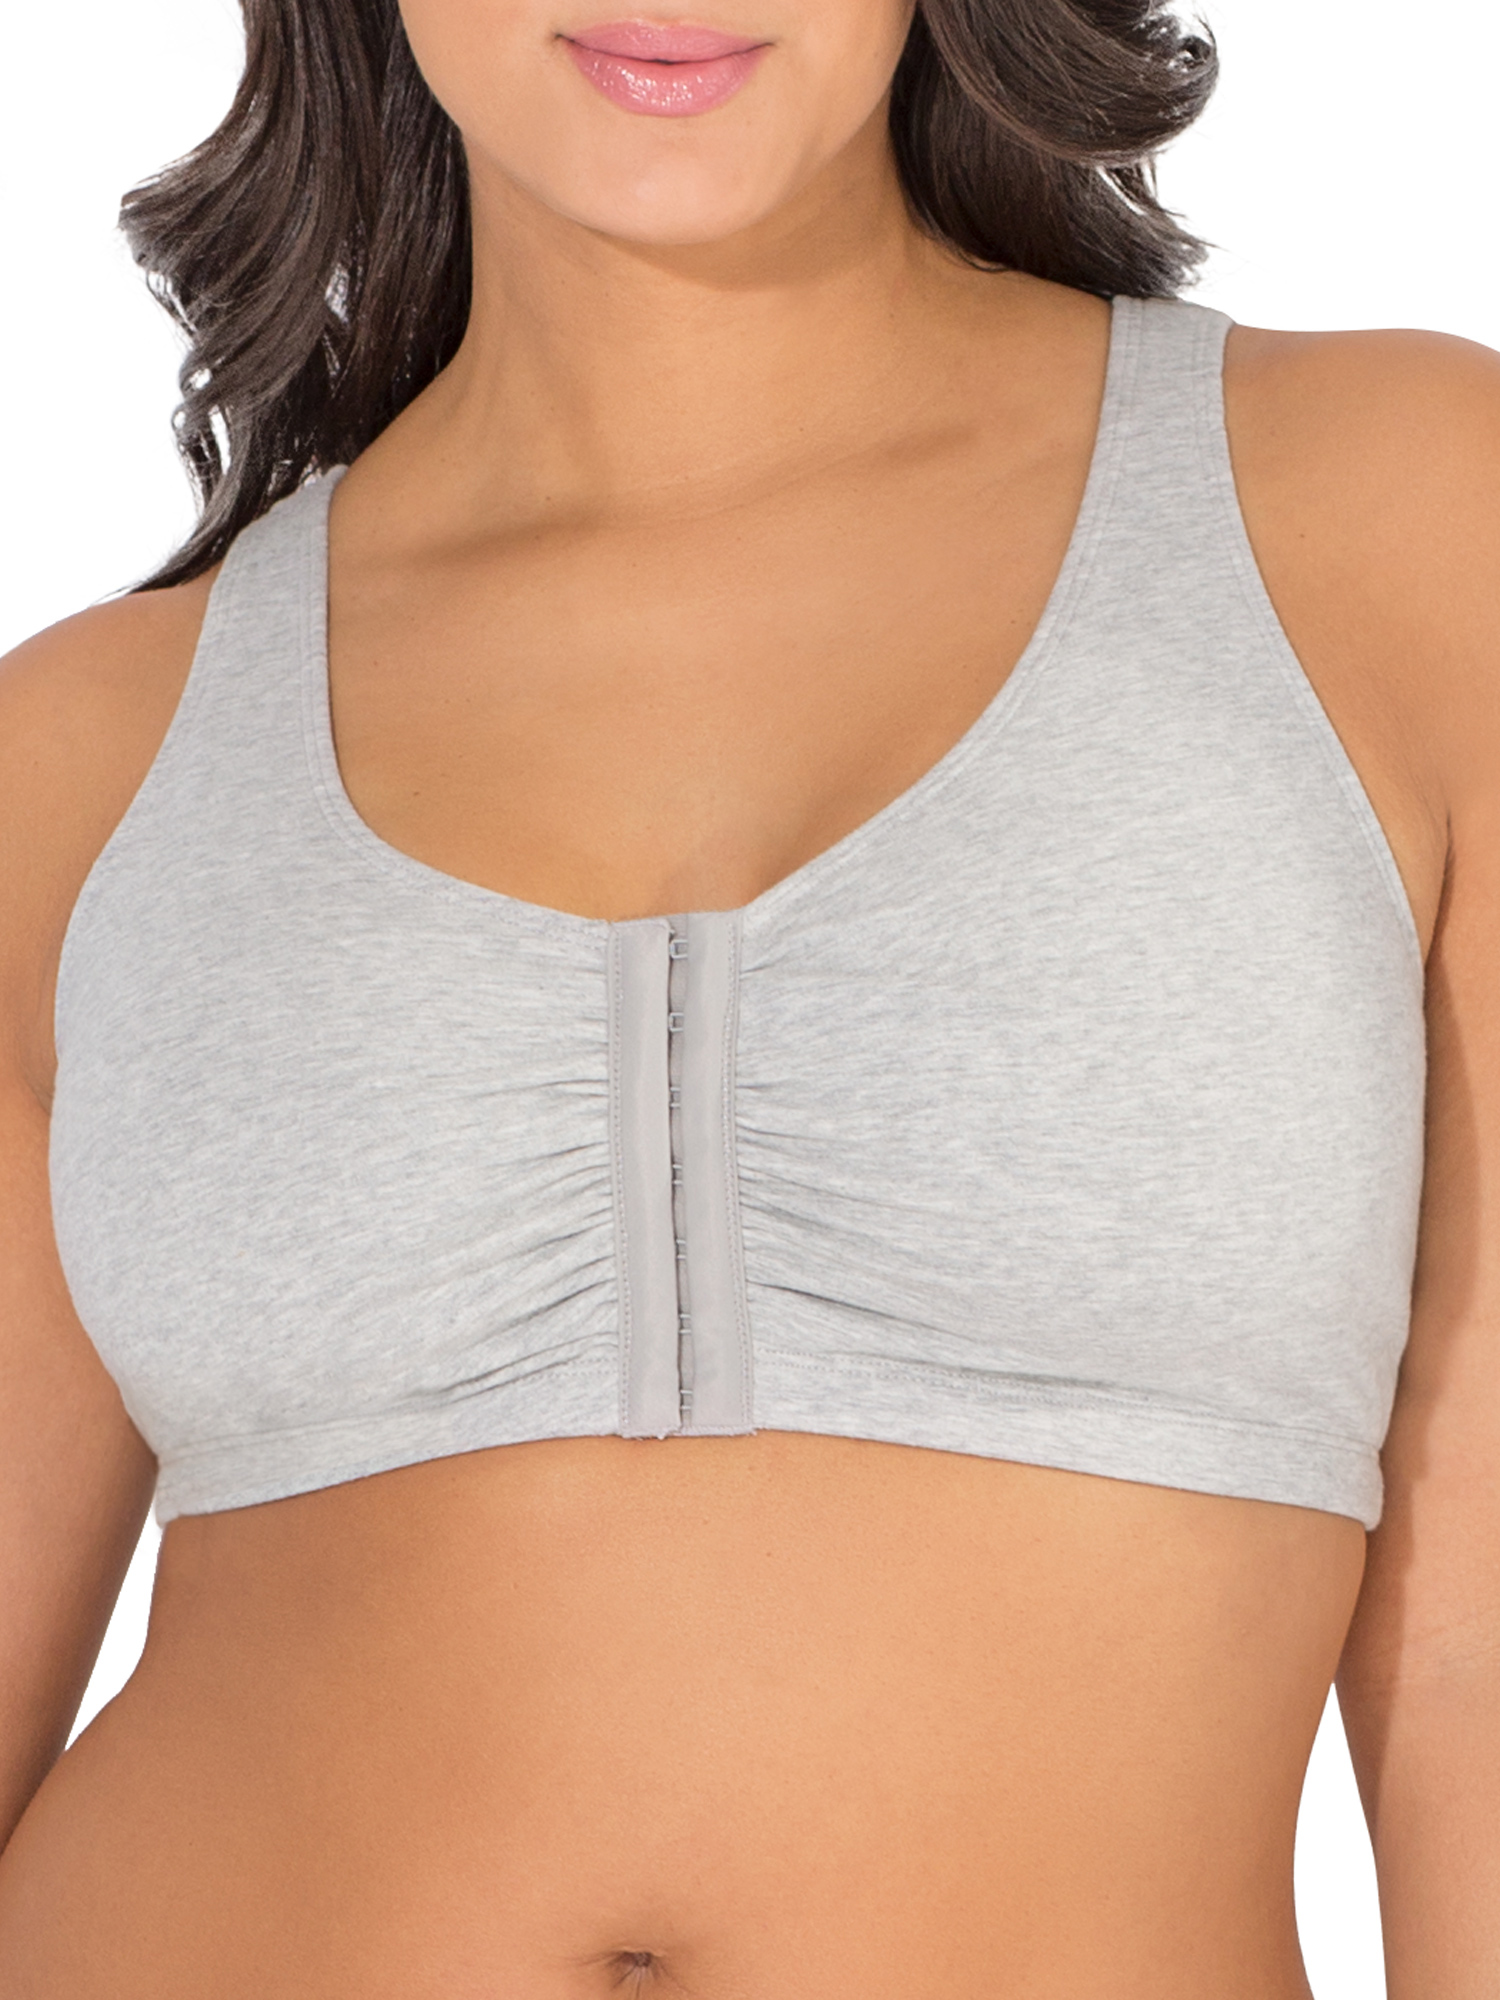 Fruit of the Loom - Comfort Front-Close Sports Bra, Style&nbsp;96014D, 3-Pack - image 4 of 8